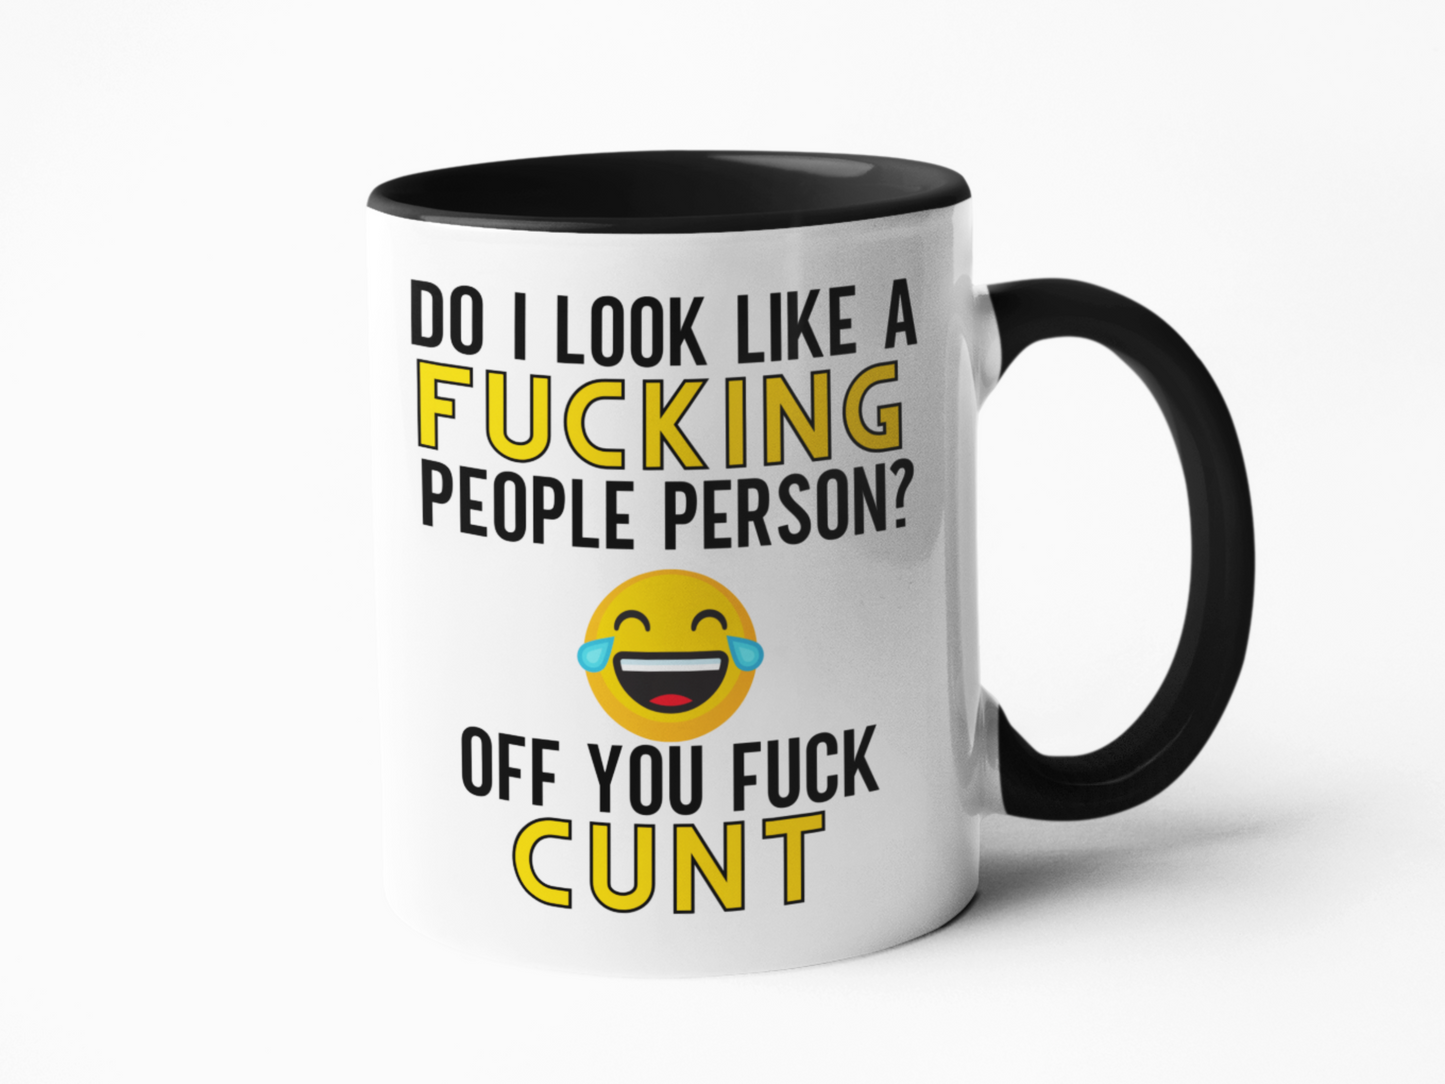 Do I look like a fucking people person off you fuck cunt coffee mug